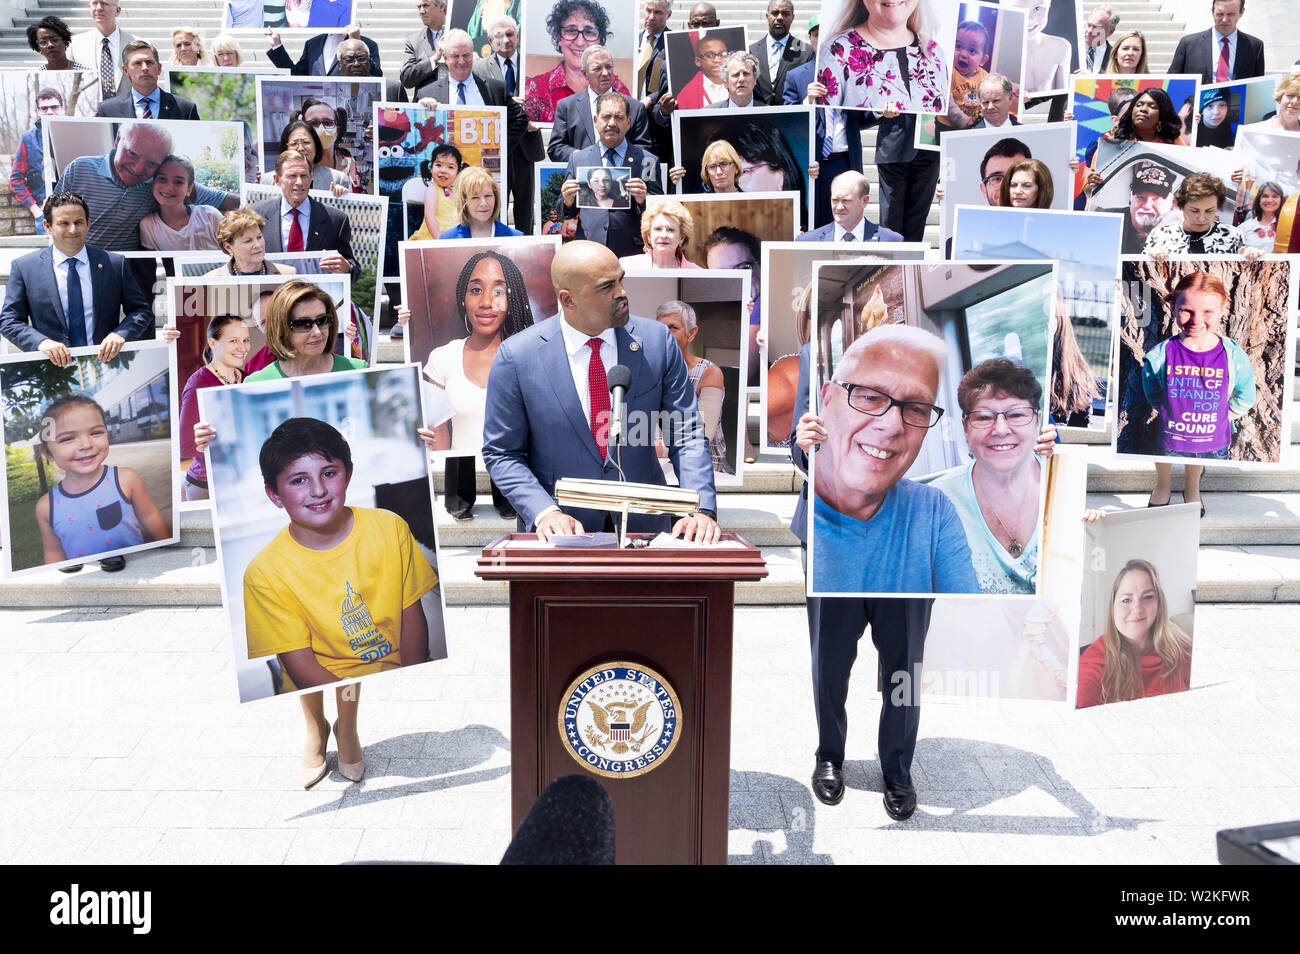 Washington, D.C, USA. 9th July, 2019. U.S. Representative MARC VEASEY (D-TX) in front of a group of Democratic Senators and Representatives on the steps of the U.S. Capitol speaking against the ''assault on protections for people with pre-existing conditions'', on the steps of the US Capitol in Washington, DC on July 9, 2019. Credit: Michael Brochstein/ZUMA Wire/Alamy Live News Stock Photo